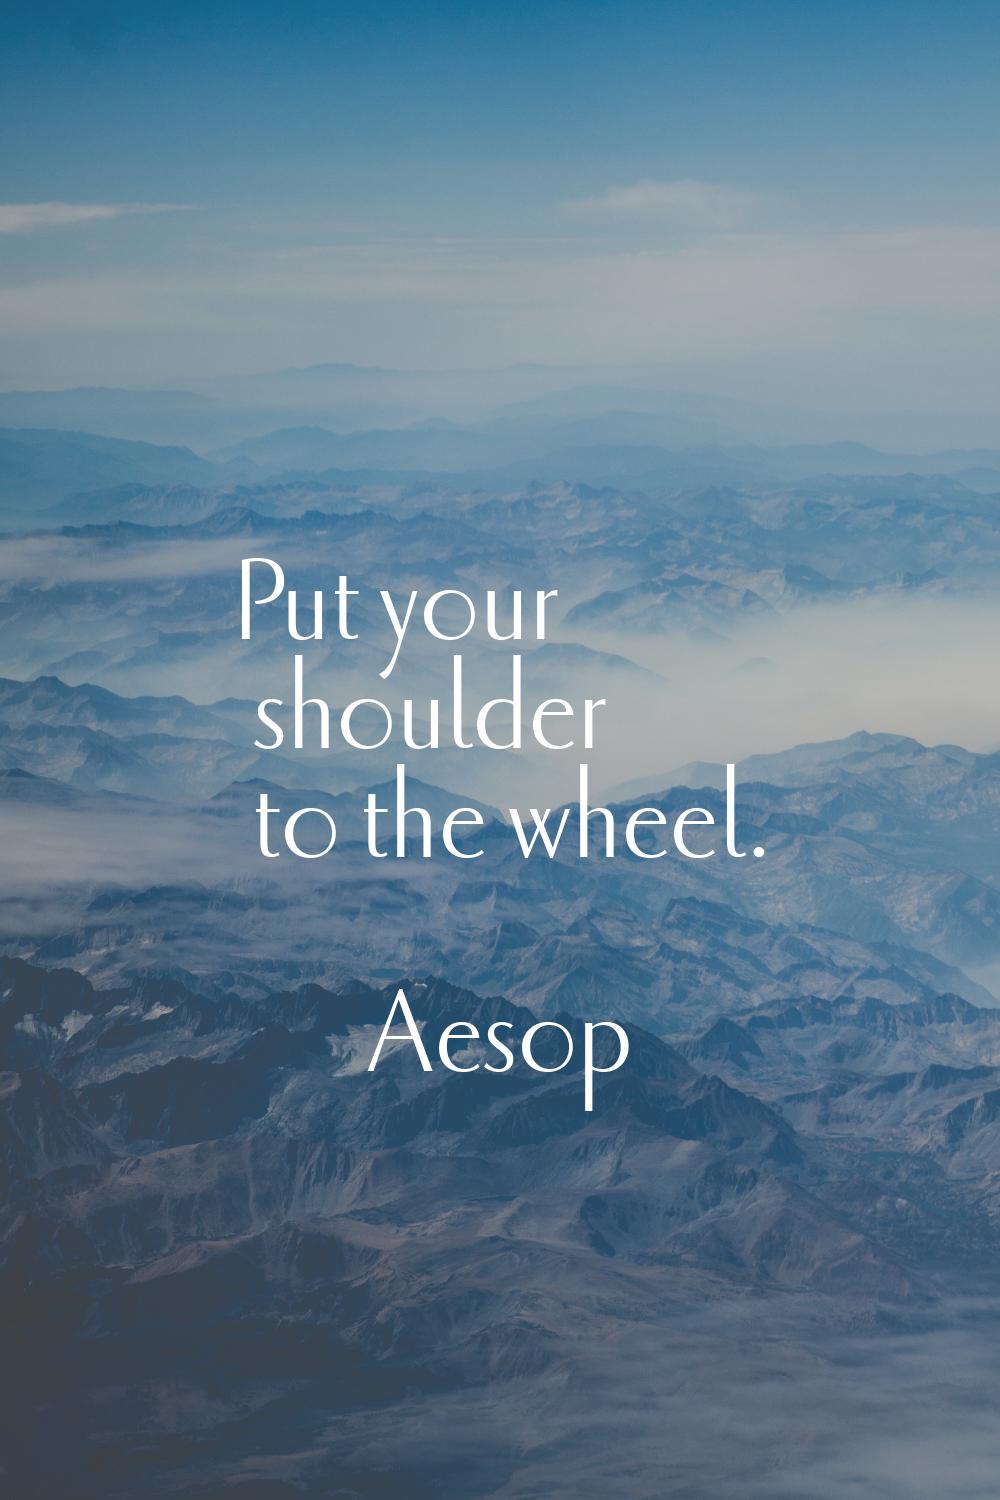 Put your shoulder to the wheel.